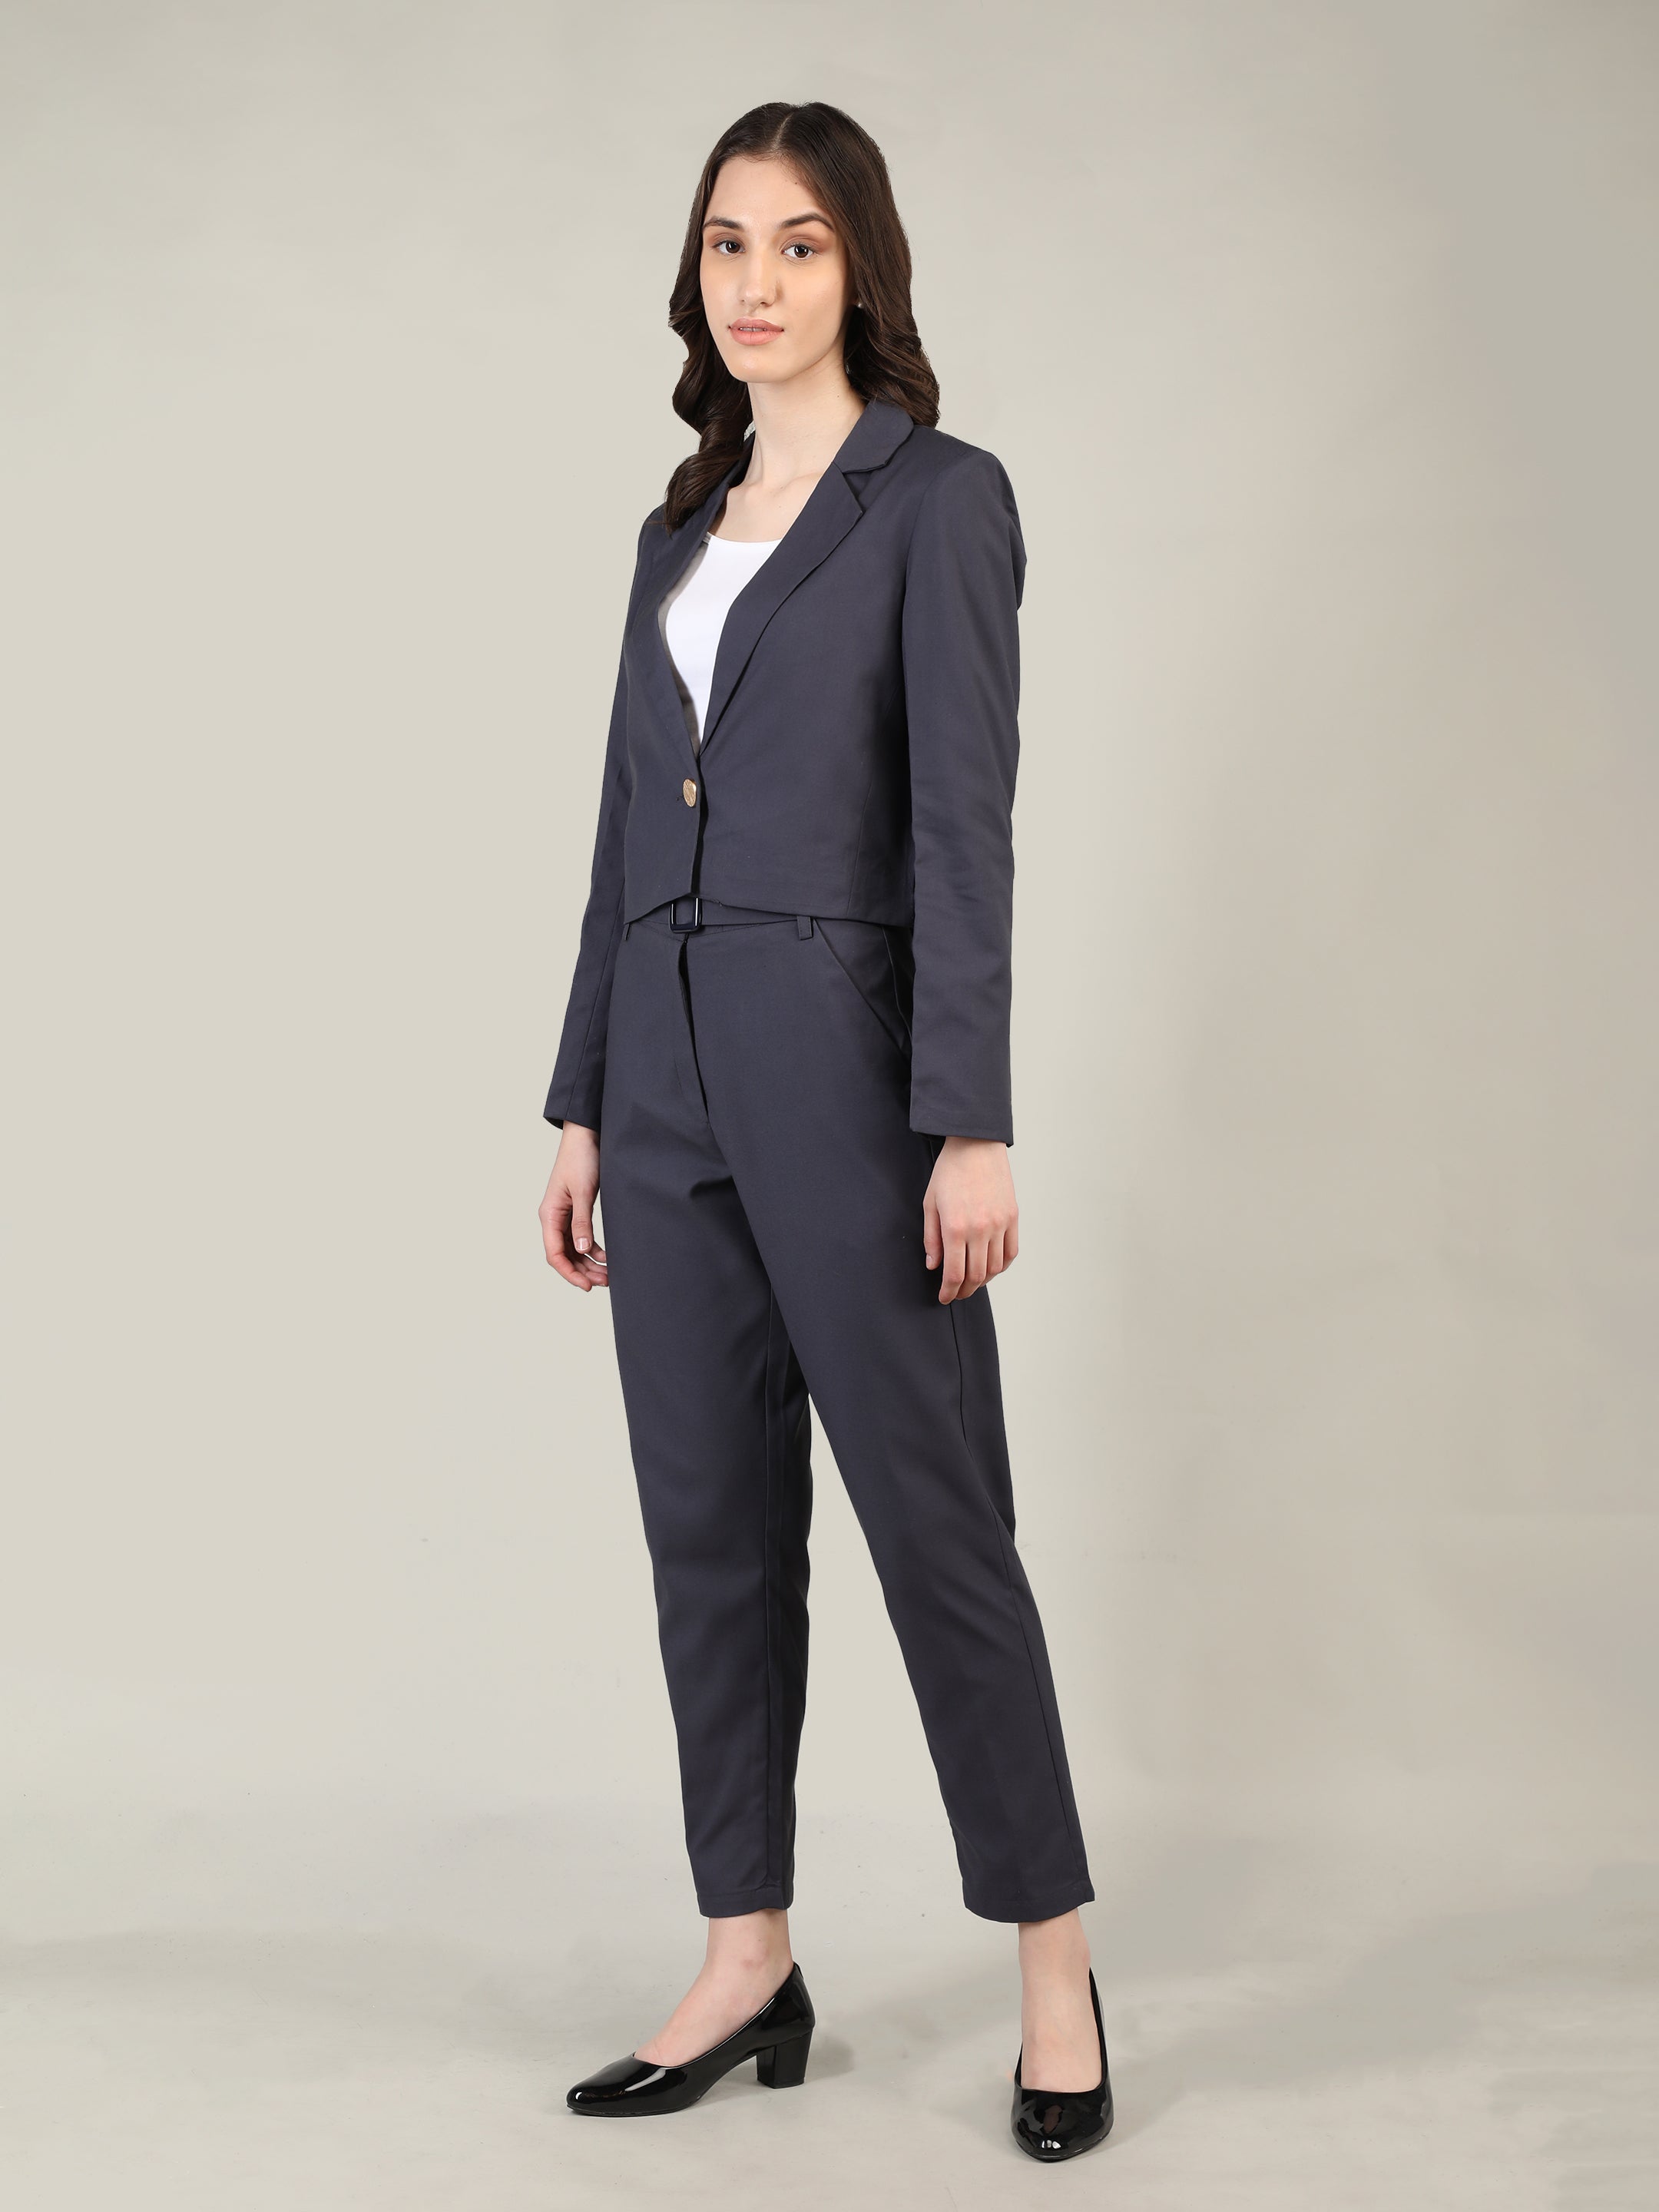 Formal Suits For Women